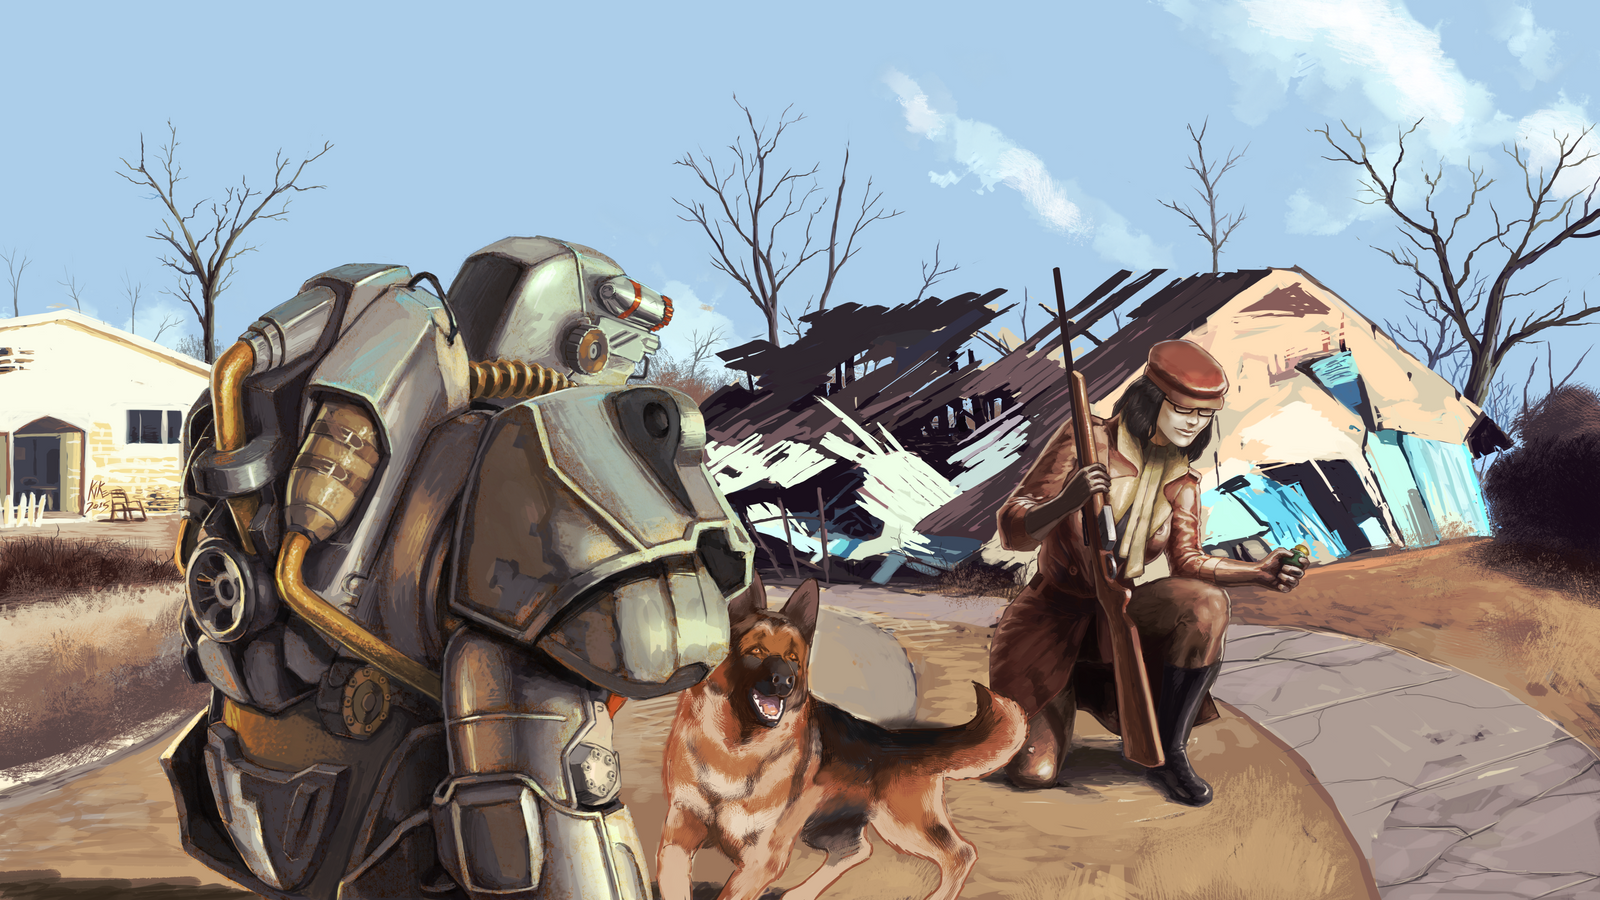 Fallout 4 Traveling by EnriqueNL on DeviantArt